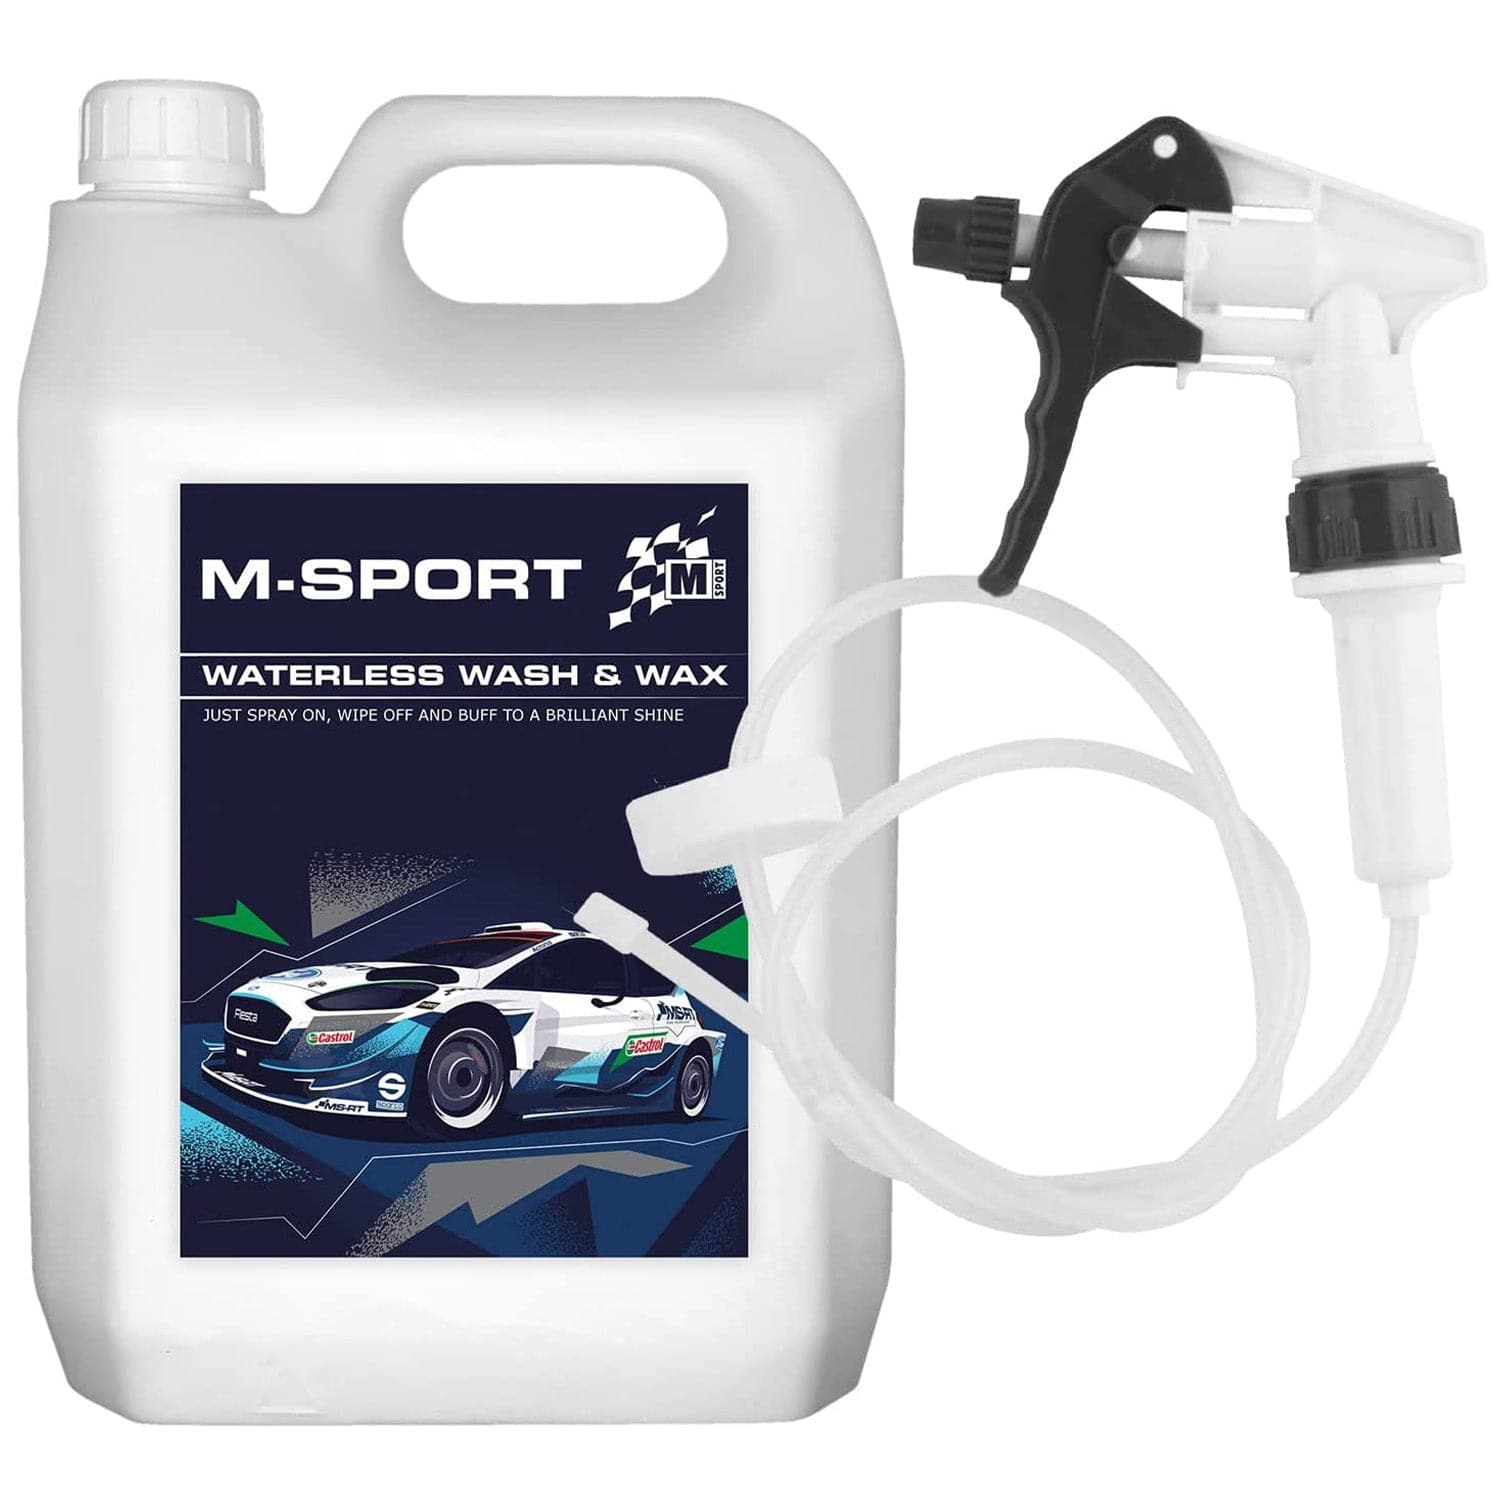 M-Sport Waterless Wash & Wax 5L (with Long Hose Trigger)